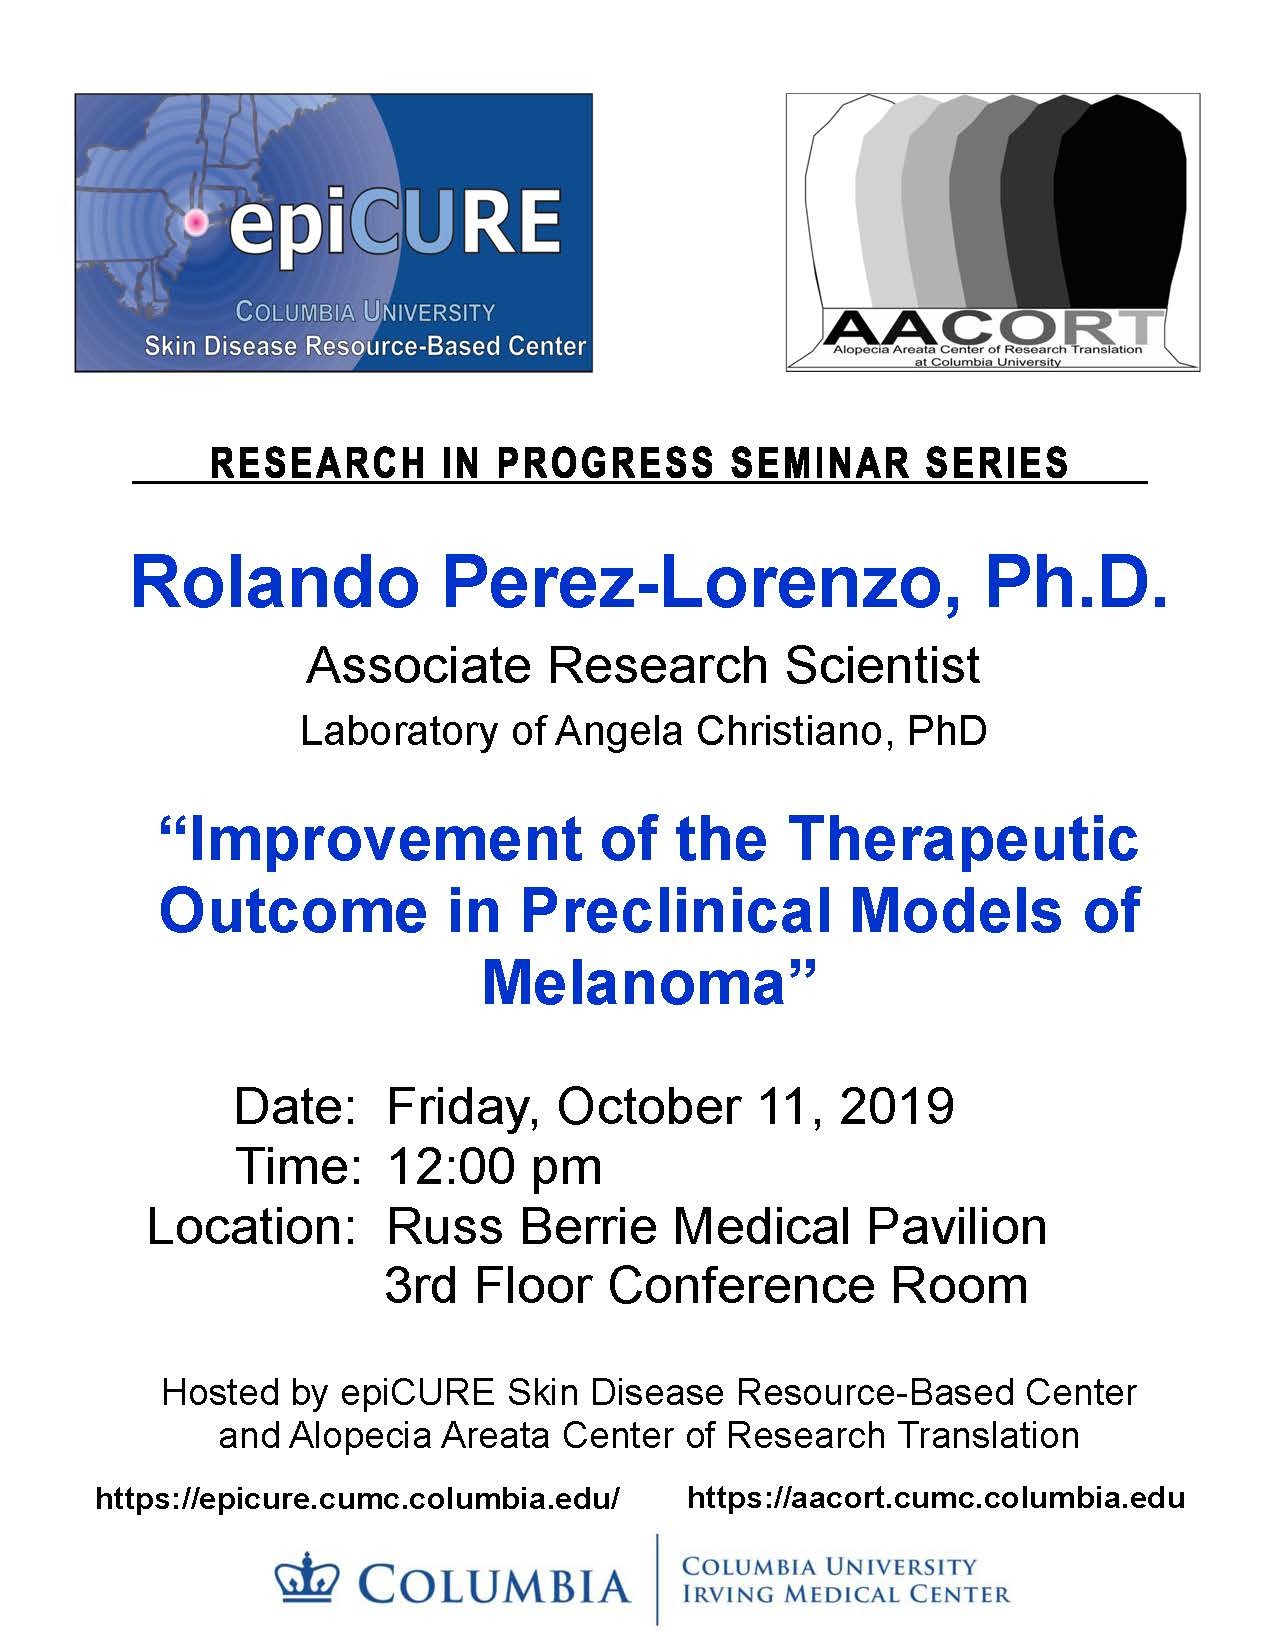 Improvement of the Therapeutic Outcome in Preclinical Models of Melanoma